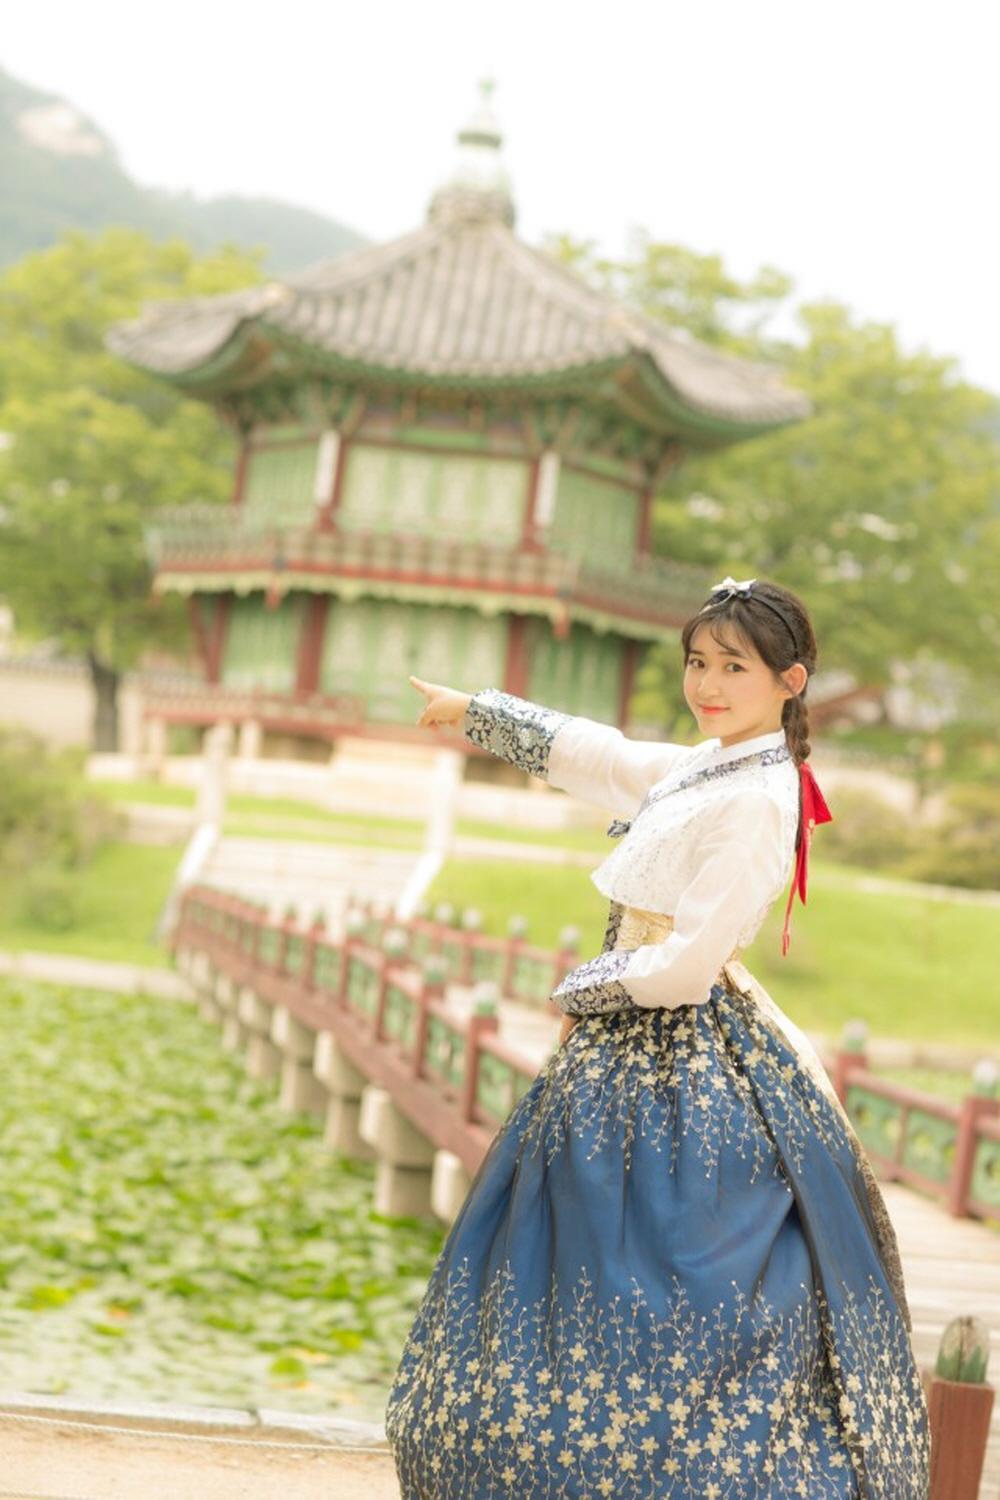 Smiling woman wearing traditional Korean hanbok in front of historic building and trees under blue sky.